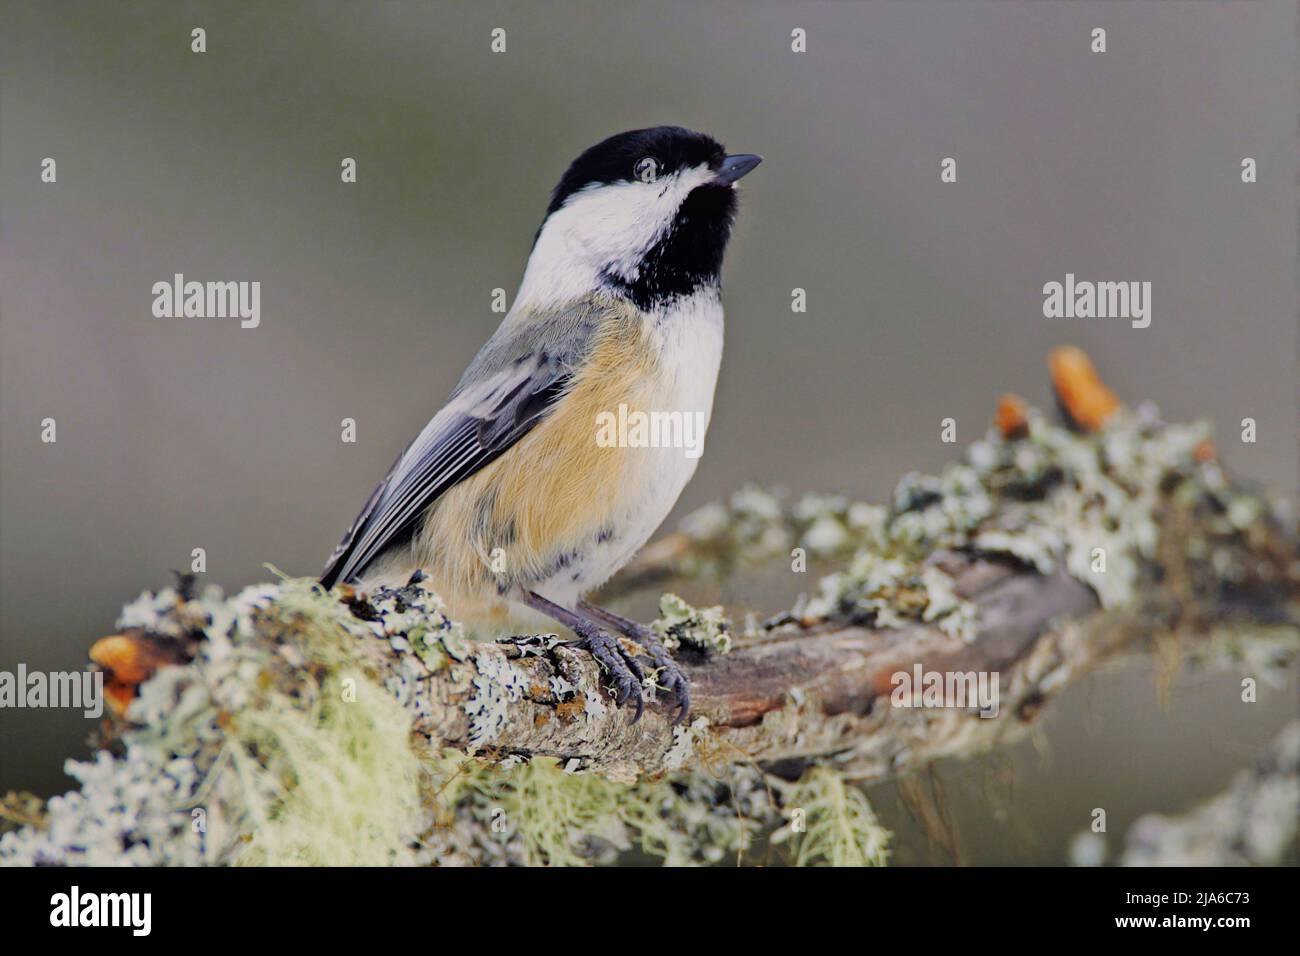 Black-capped Chickadee perched on branch covered in lichen Stock Photo